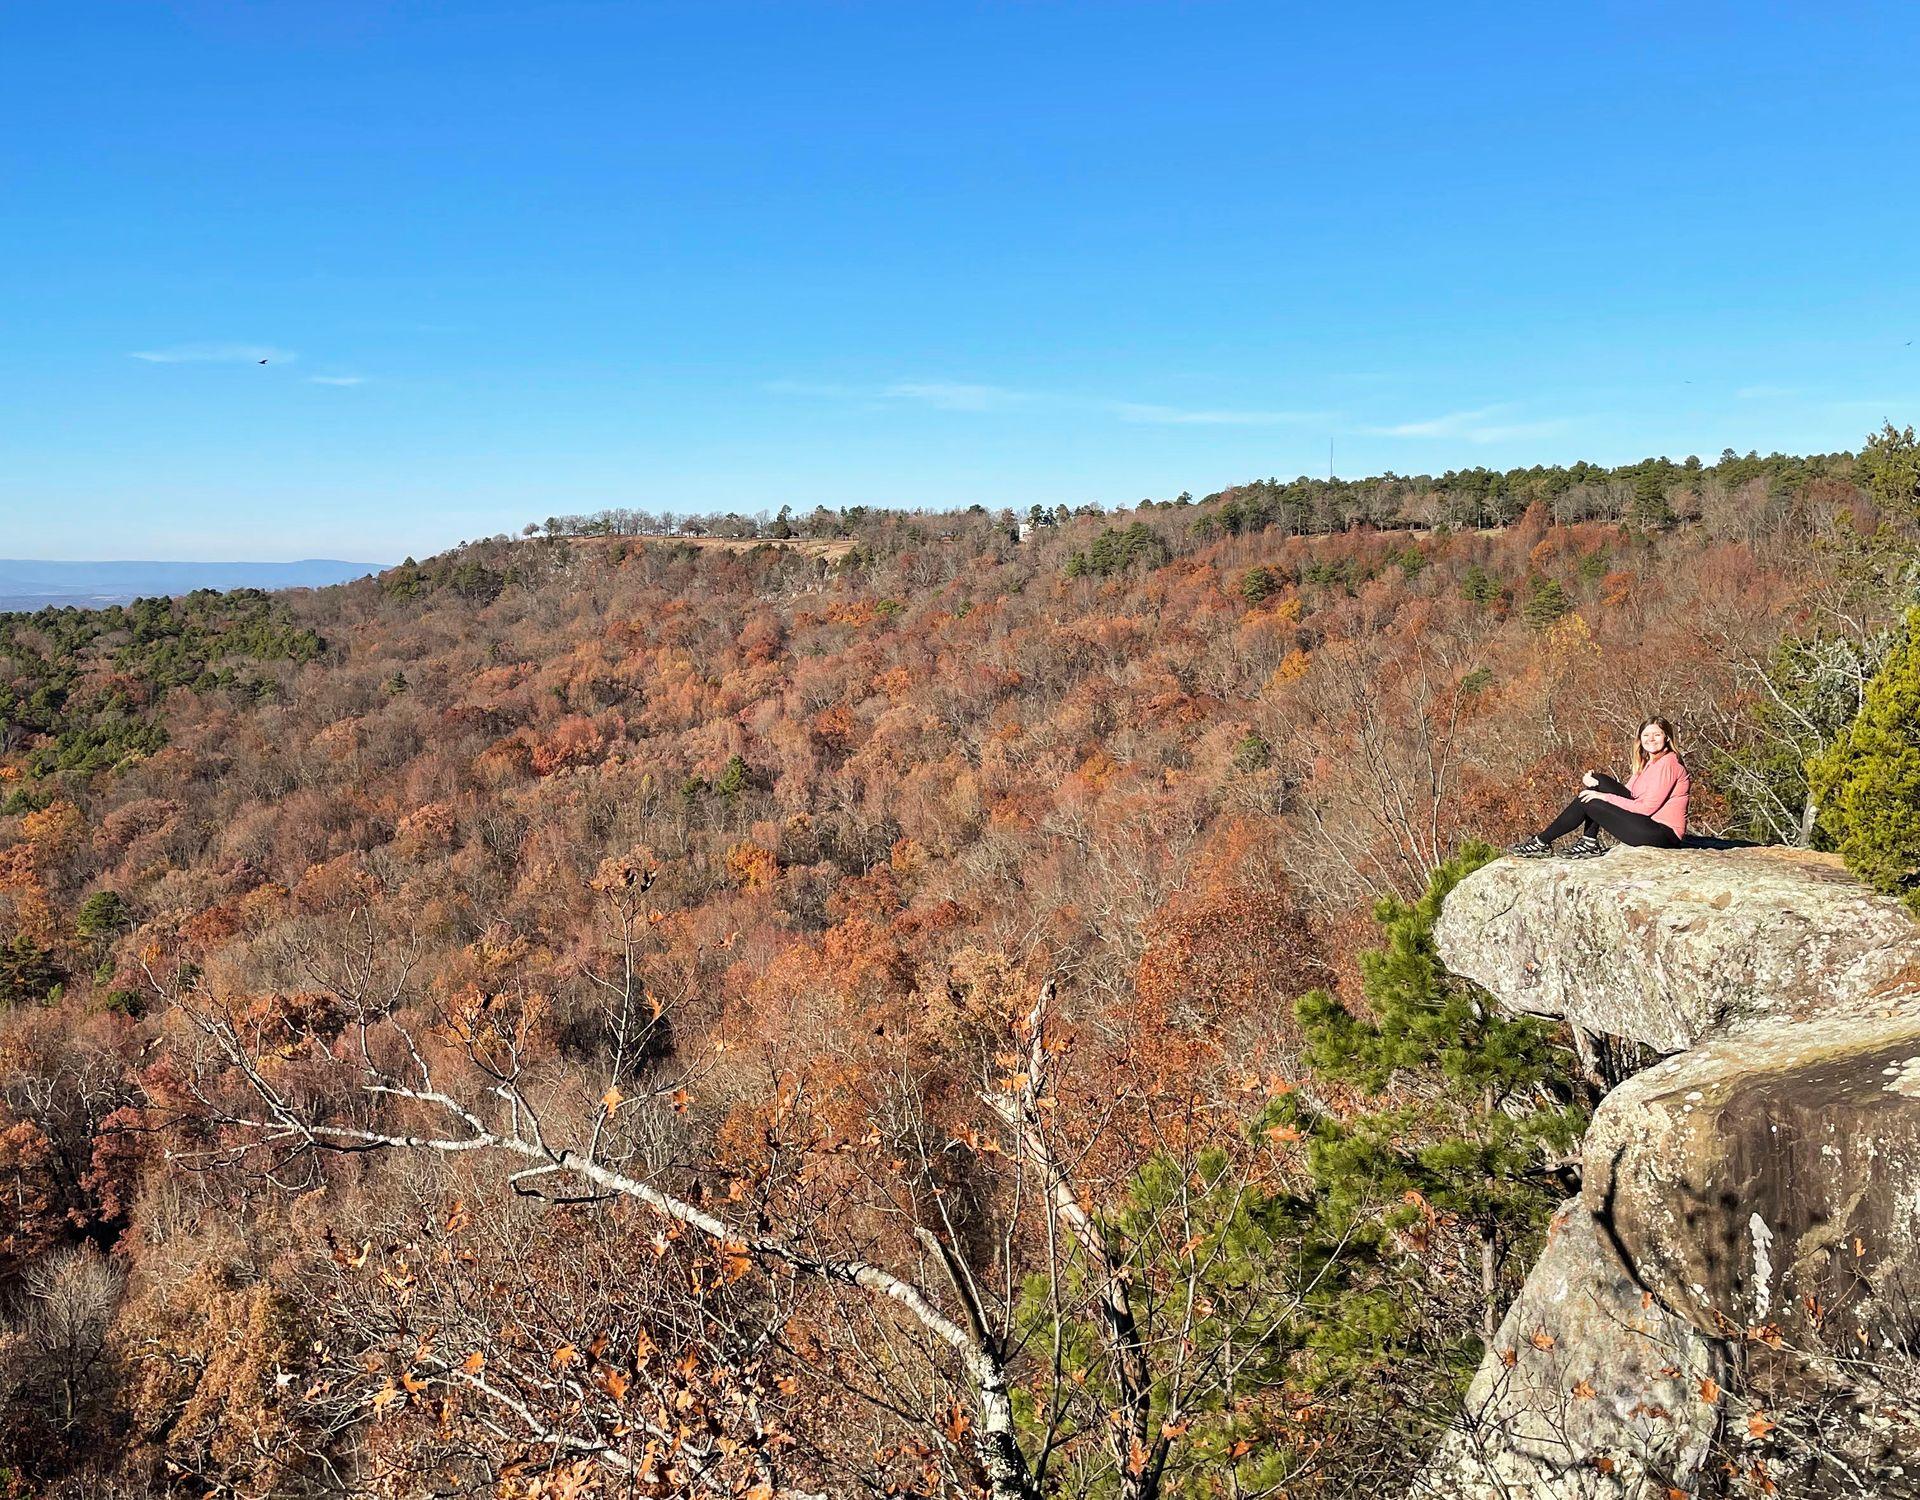 Lydia sitting on a rock that sticks out into the air. In the background, there is a mountain covered in trees with orange foliage.